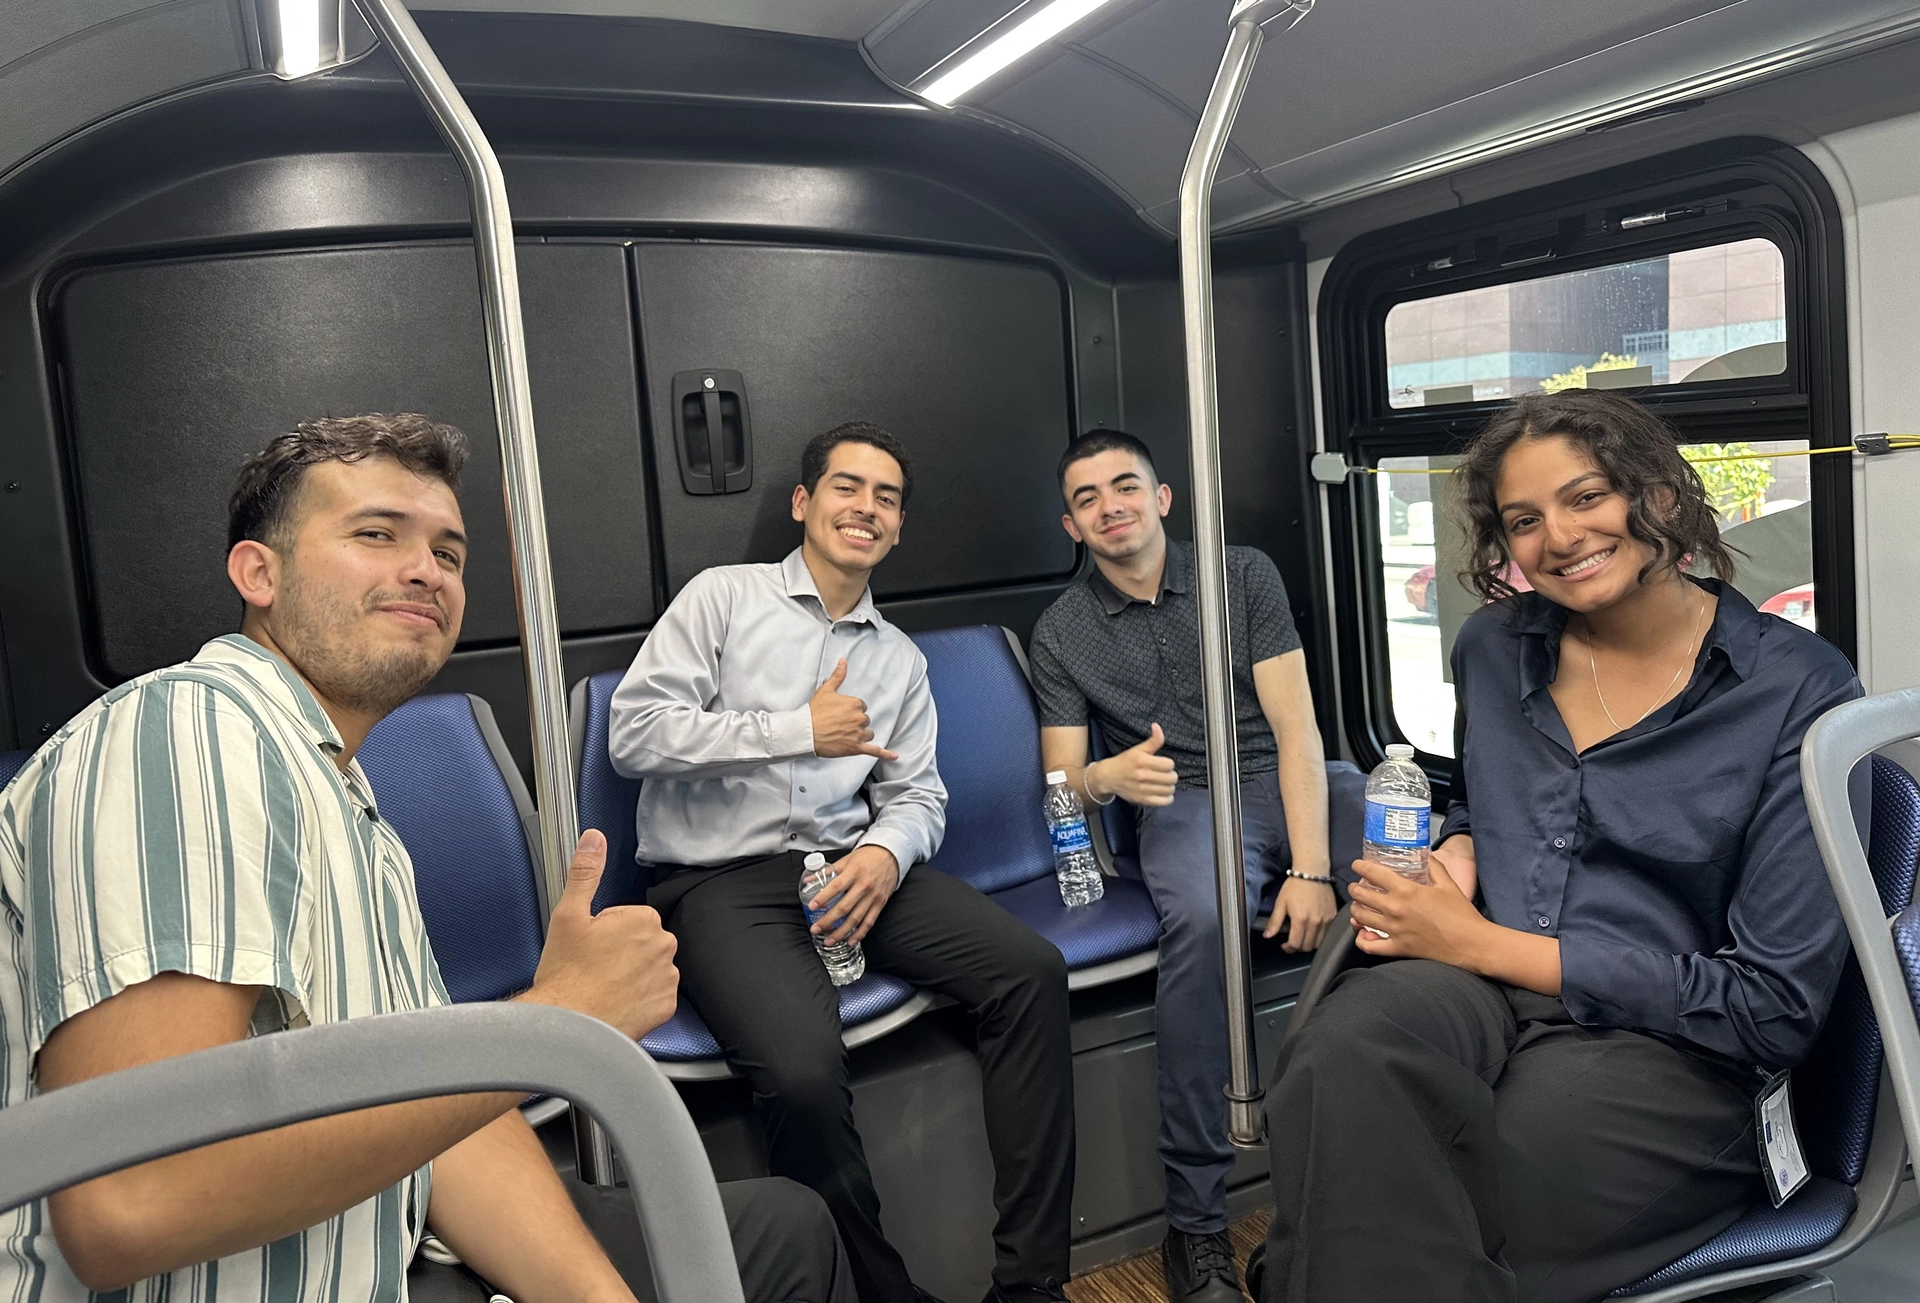 Four young interns holding water bottles, smiling, and giving a thumbs up while riding public transportation.